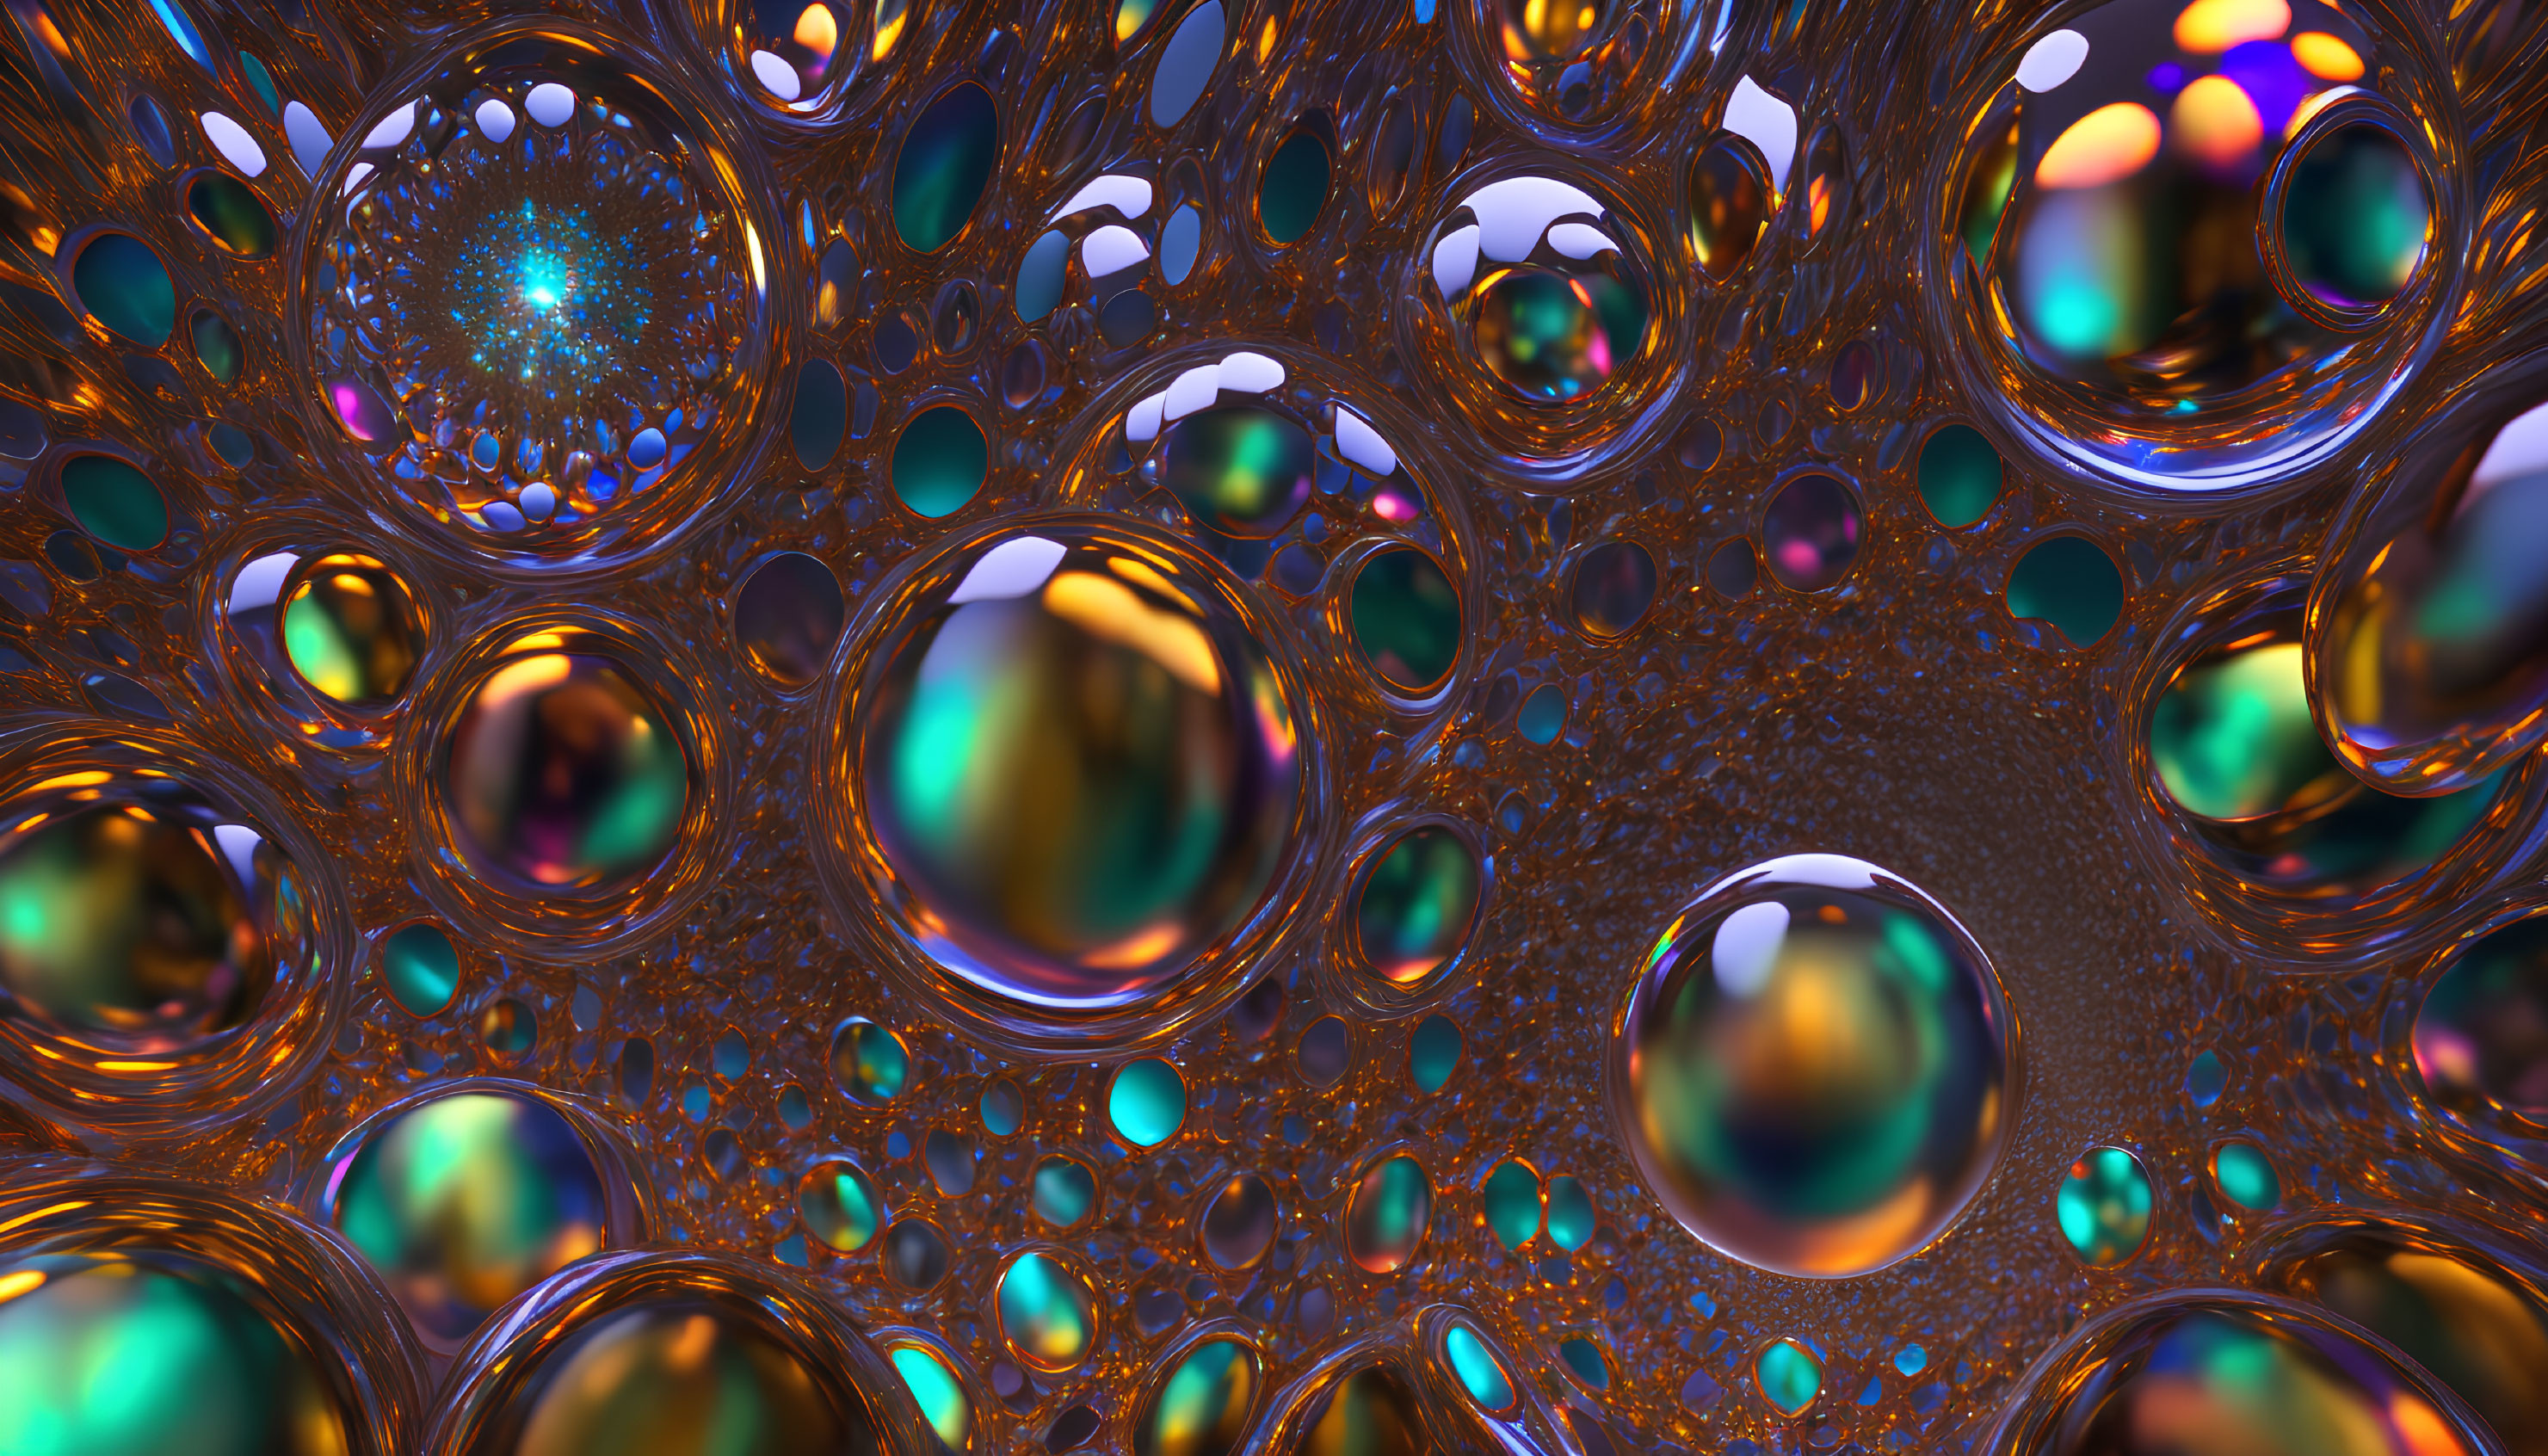 Colorful Bubble Reflections in Intricate Metallic Structure